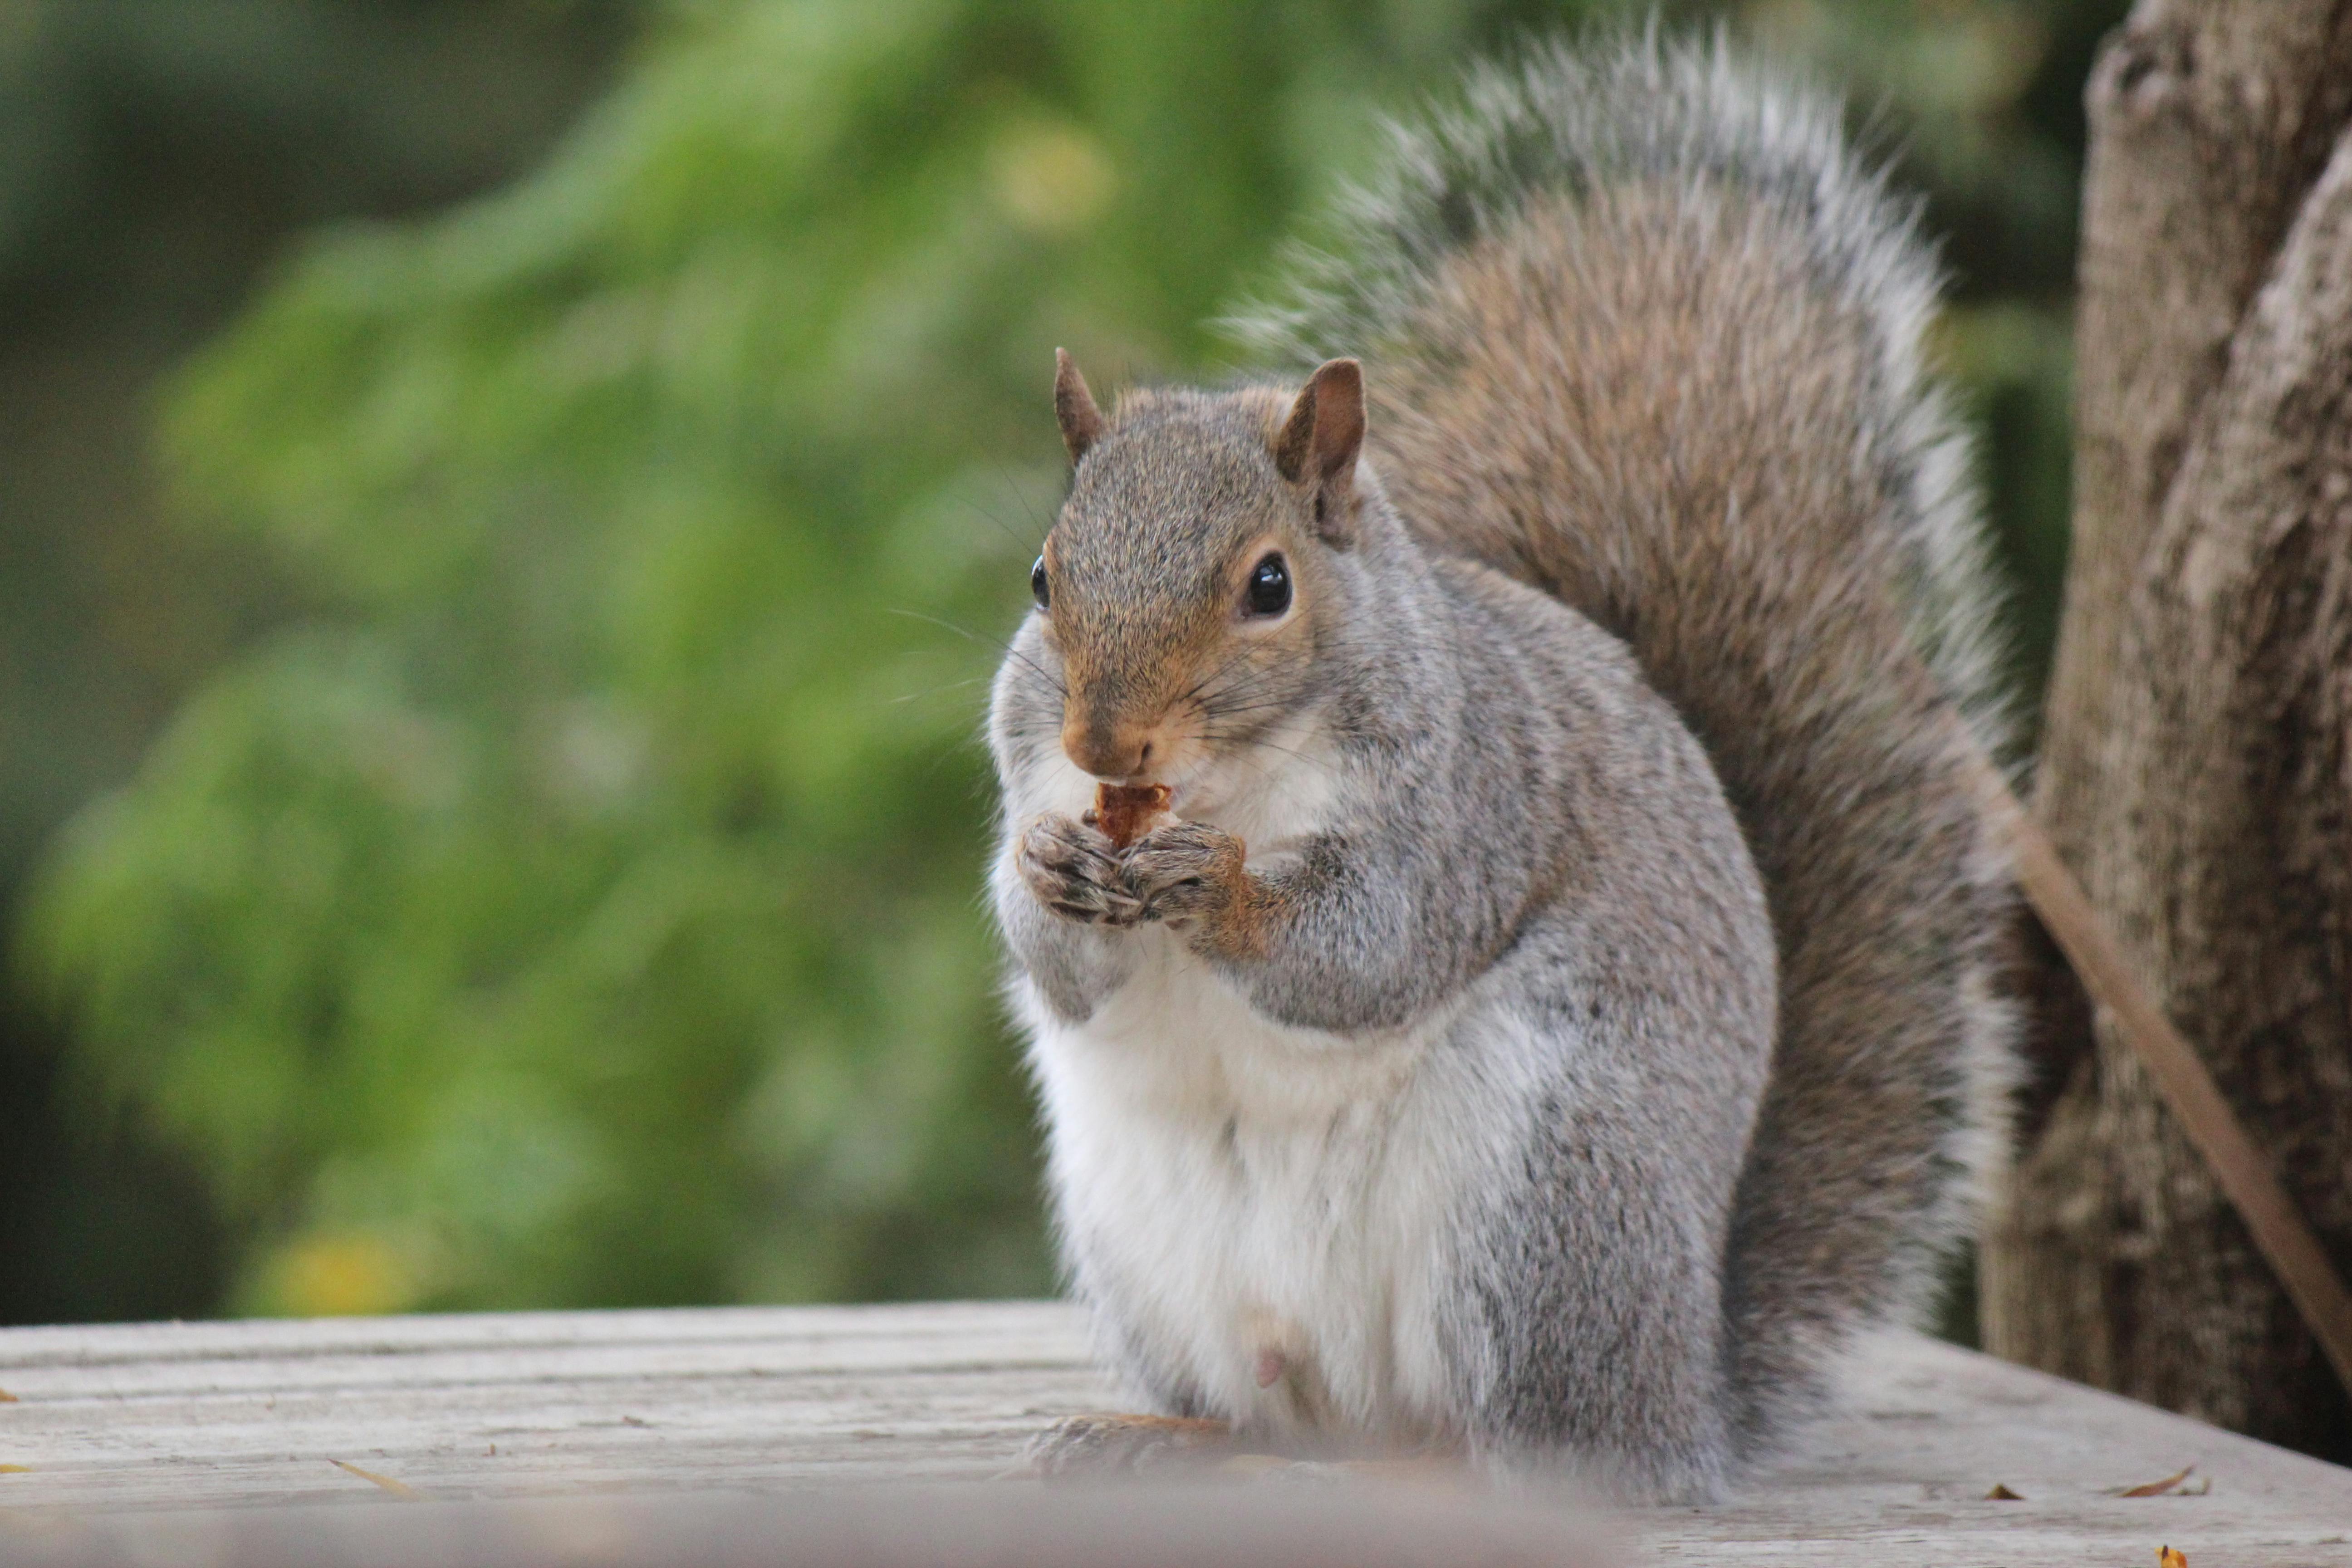 Free stock photo of eastern grey squirrel, squirrel, squirrel eating